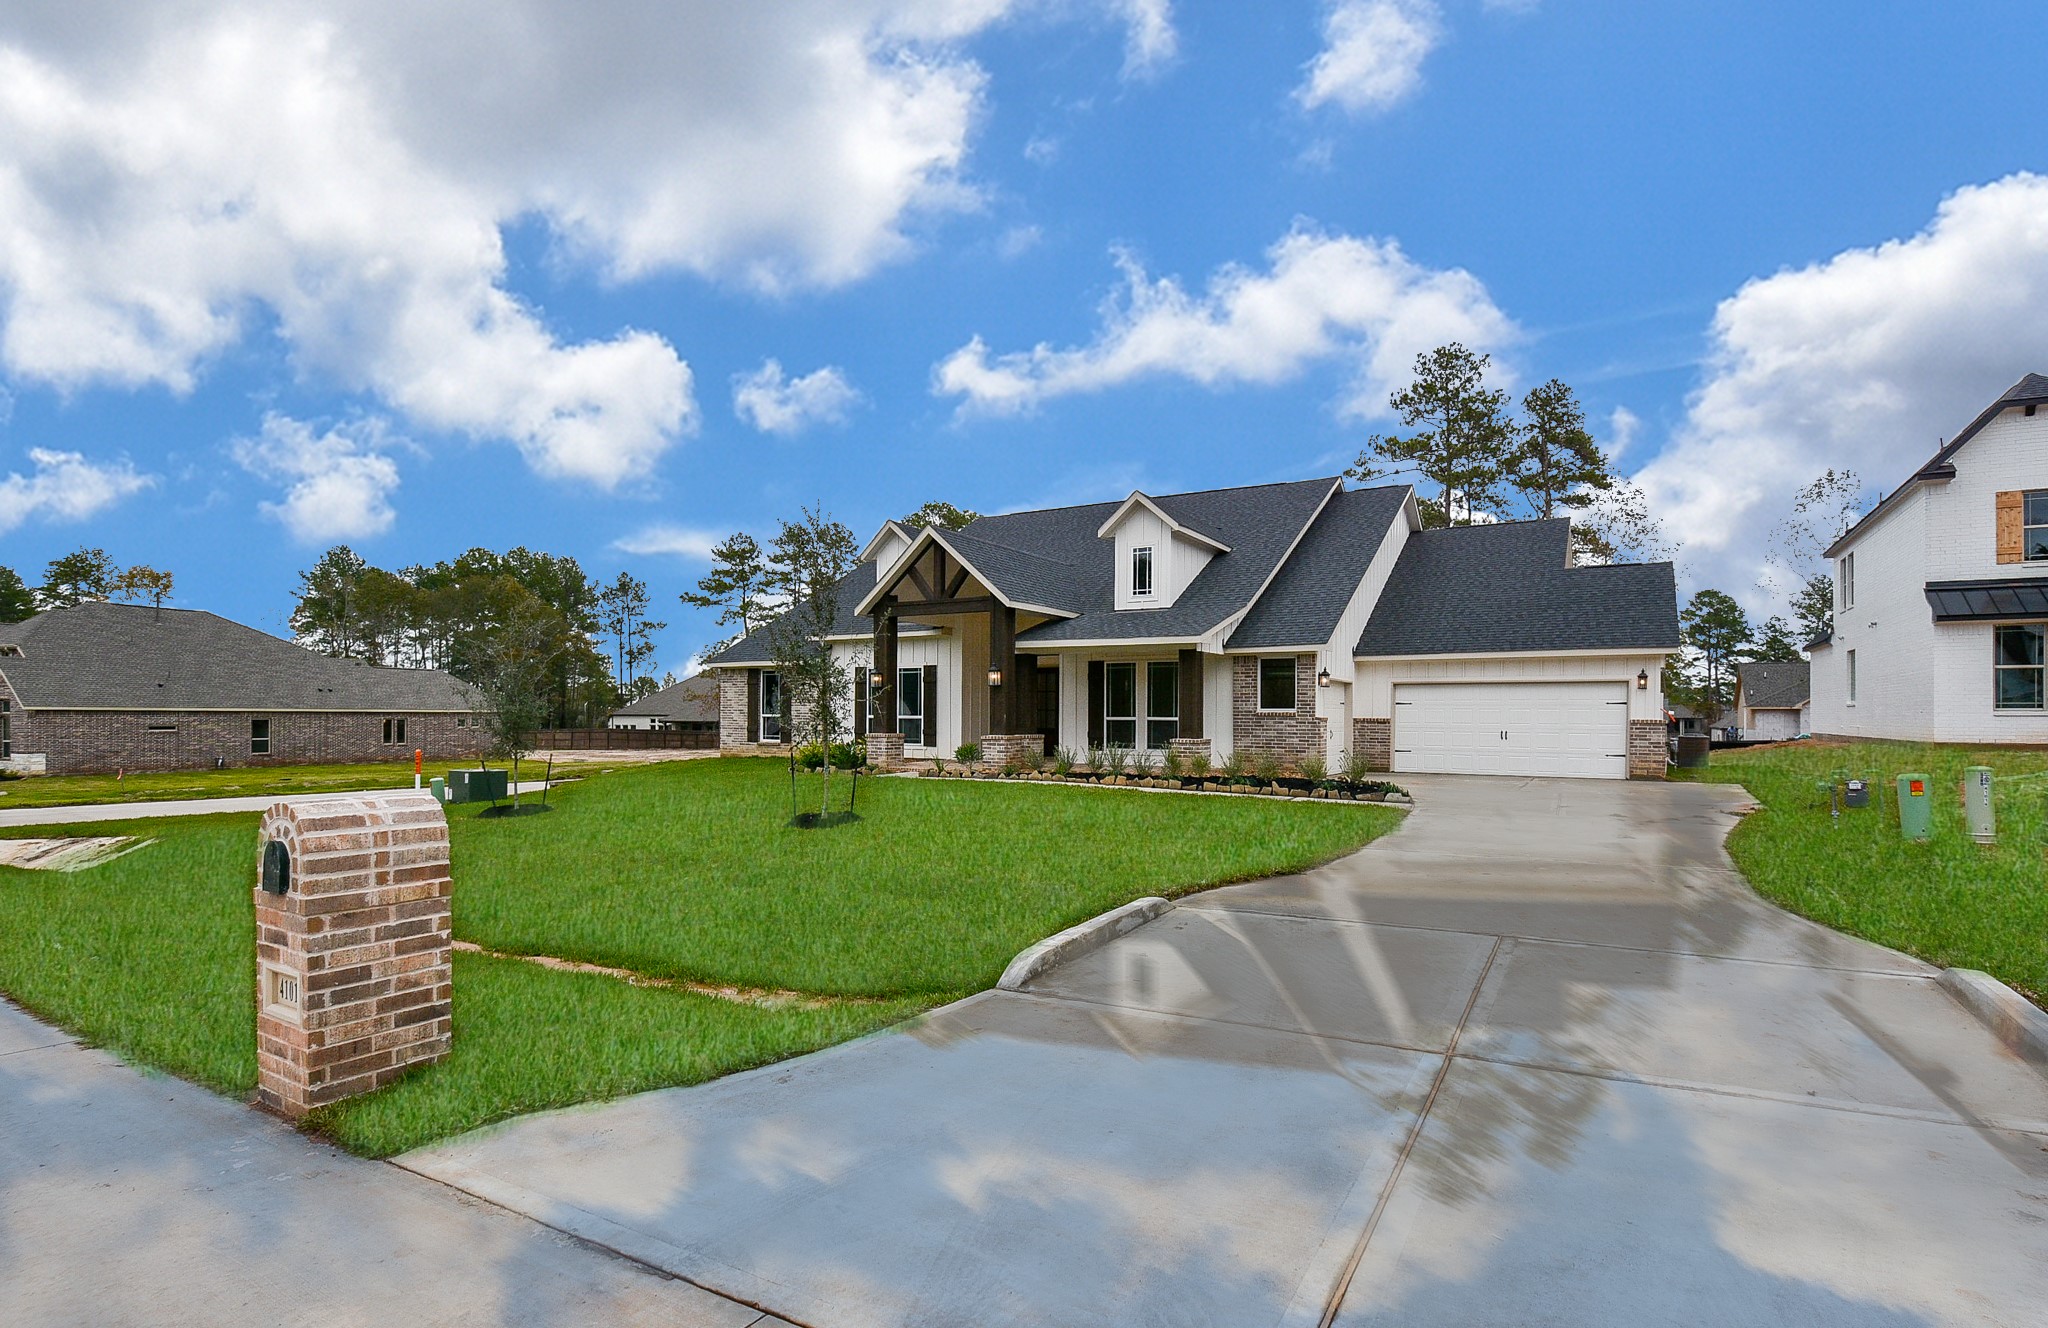 This single family, single story brick gem is located at 41041 Kimber Lane, Magnolia, TX. Pictured here is your easy, pull-in driveway, with room for both family and guest vehicles.